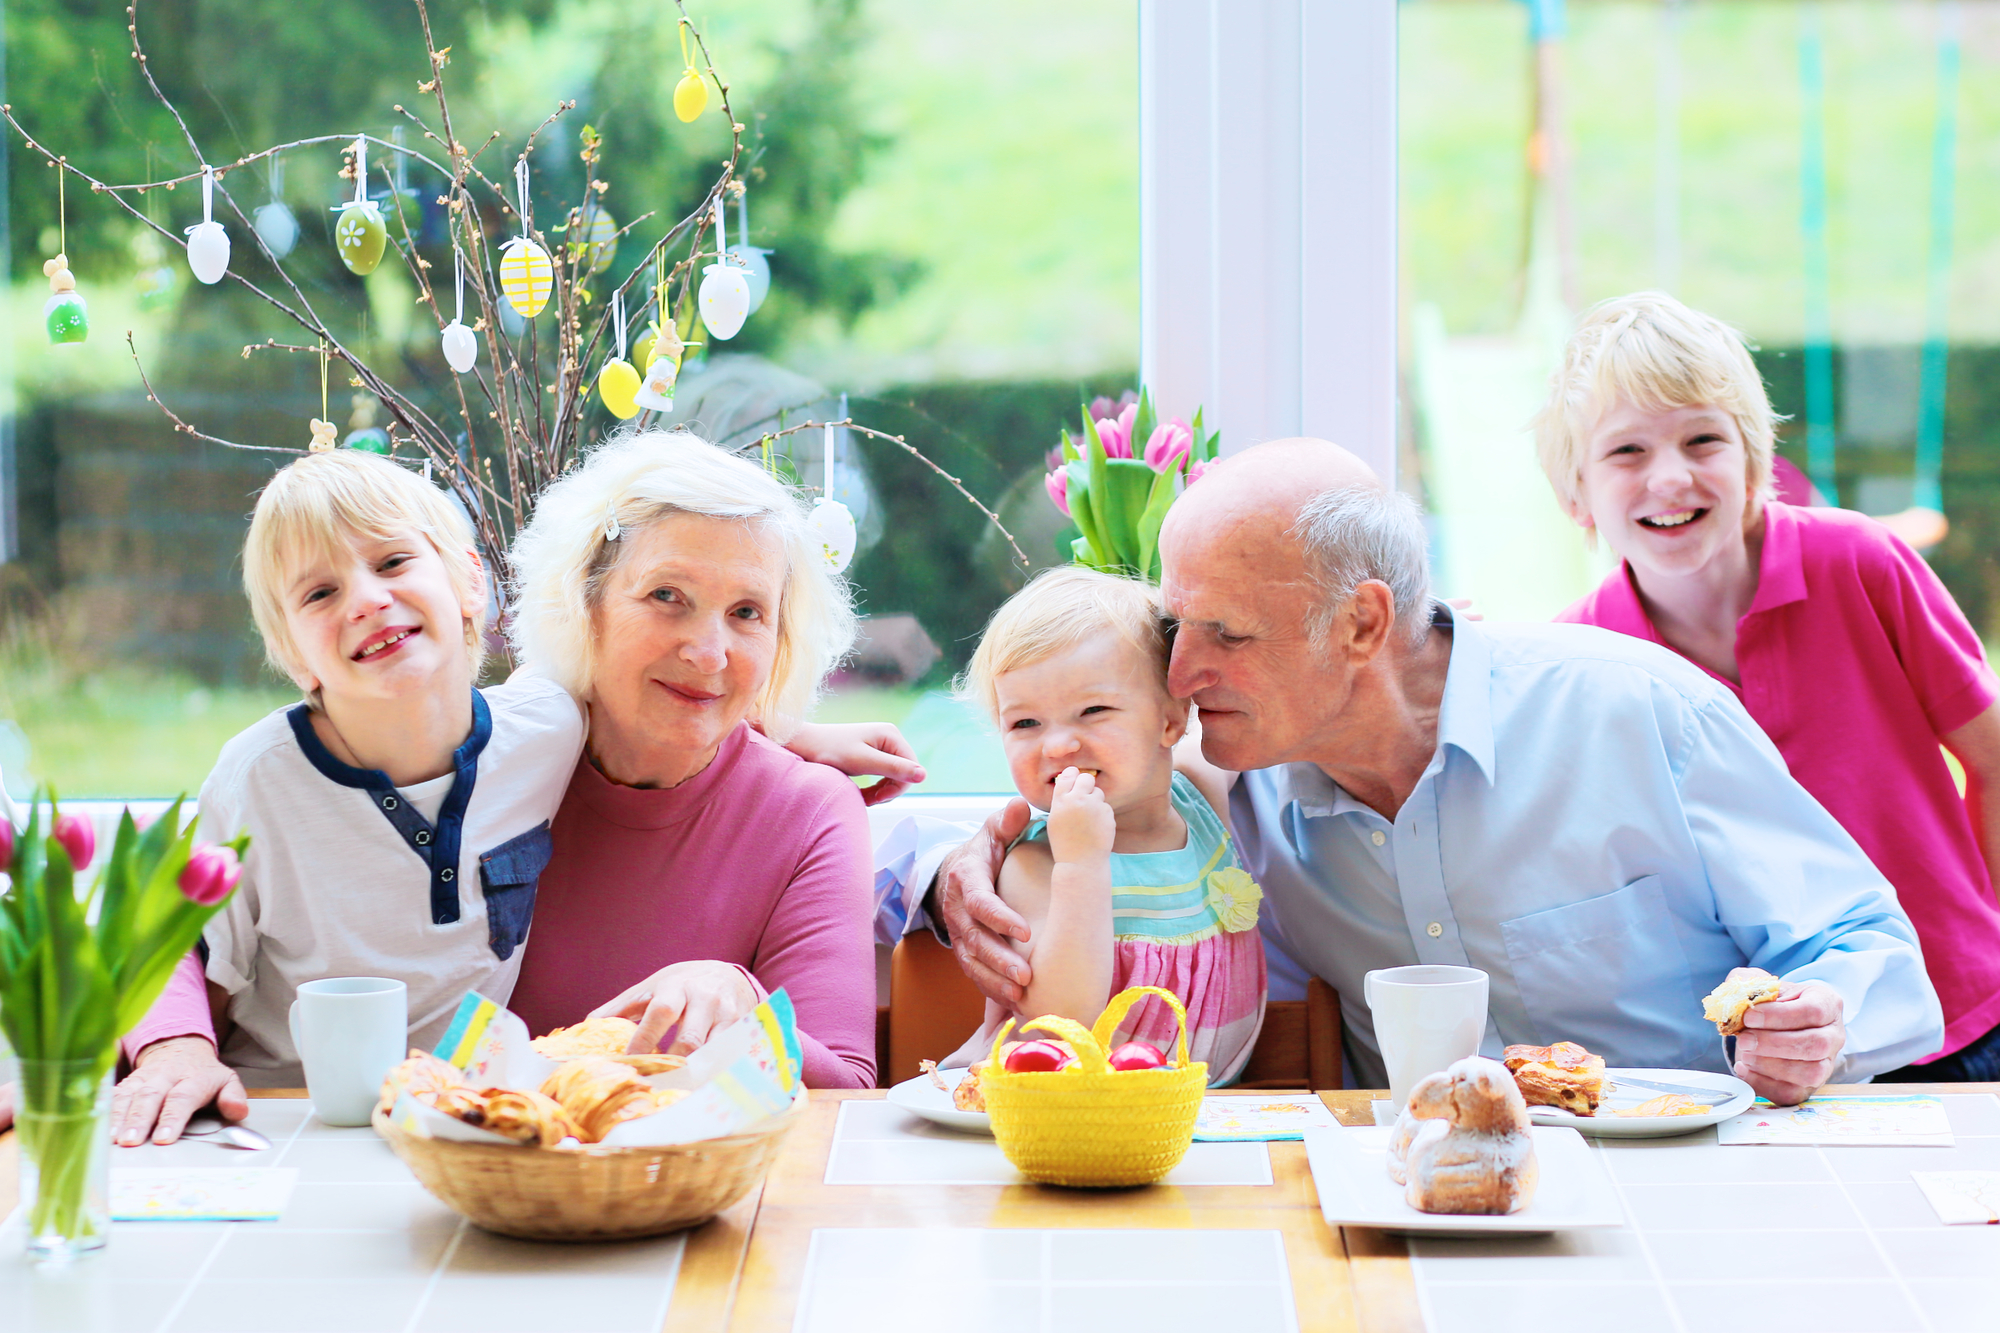 SharonSelby.com The Importance of Grandparents & Happy Grandparents